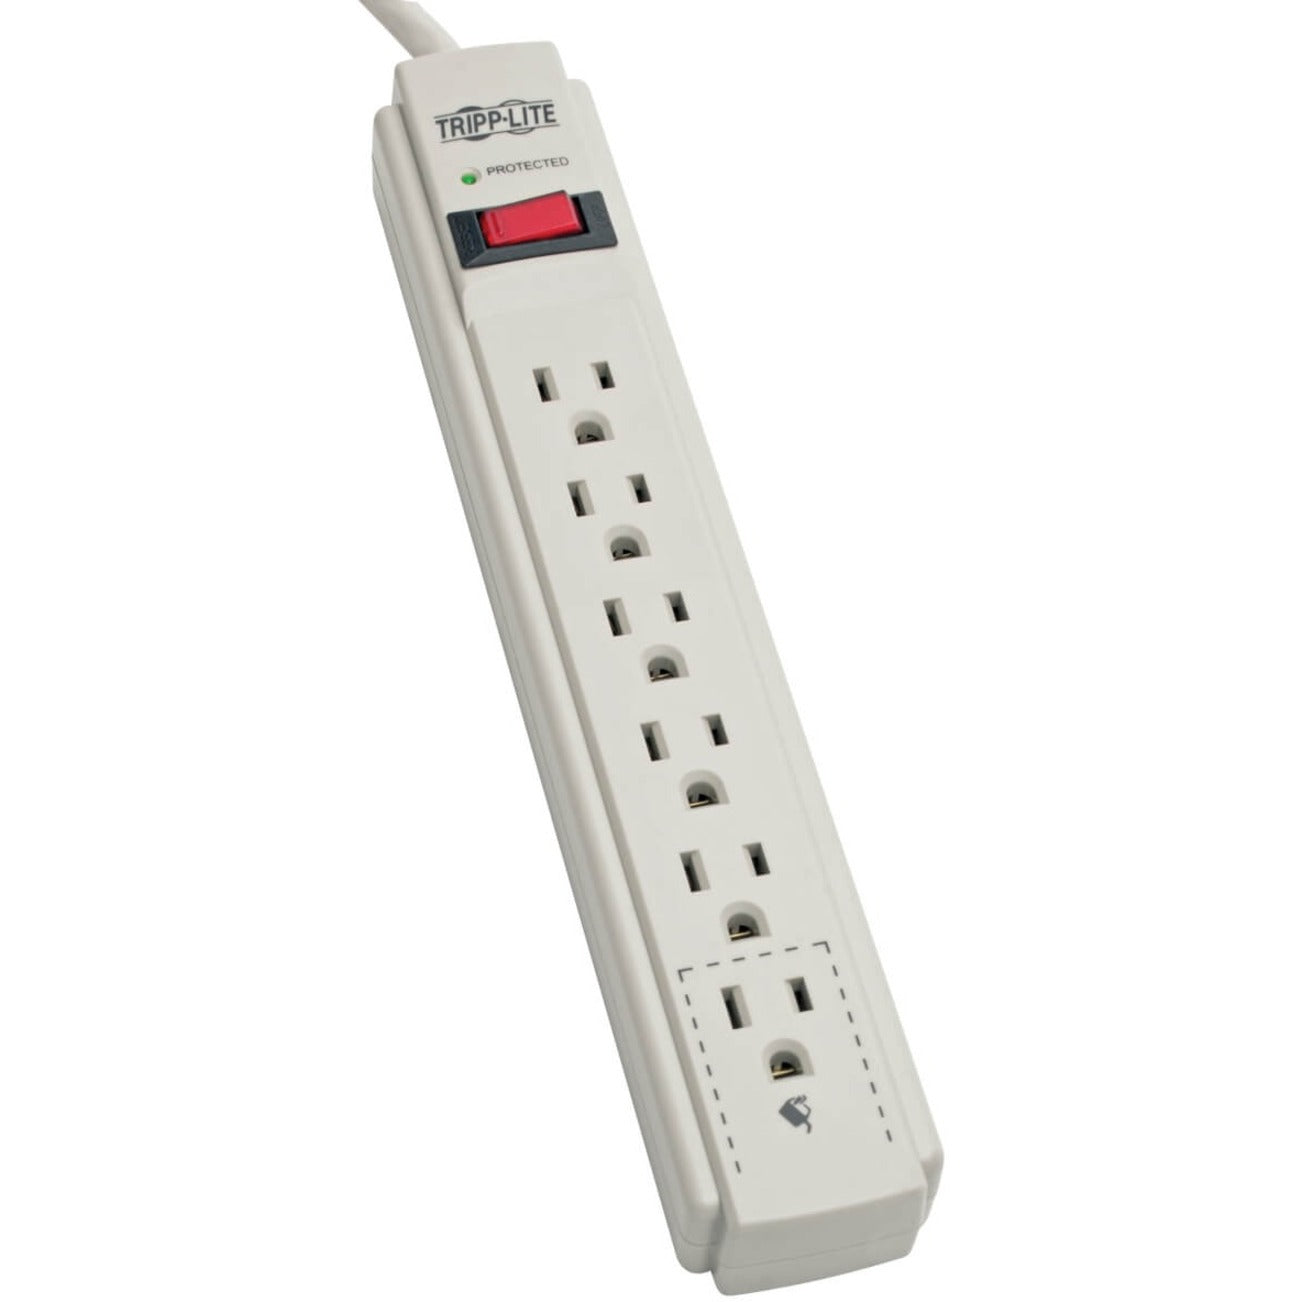 Tripp Lite TLP615 Protect It! 6-Outlet Surge Suppressor, 790 Joules, 15' Cord, White